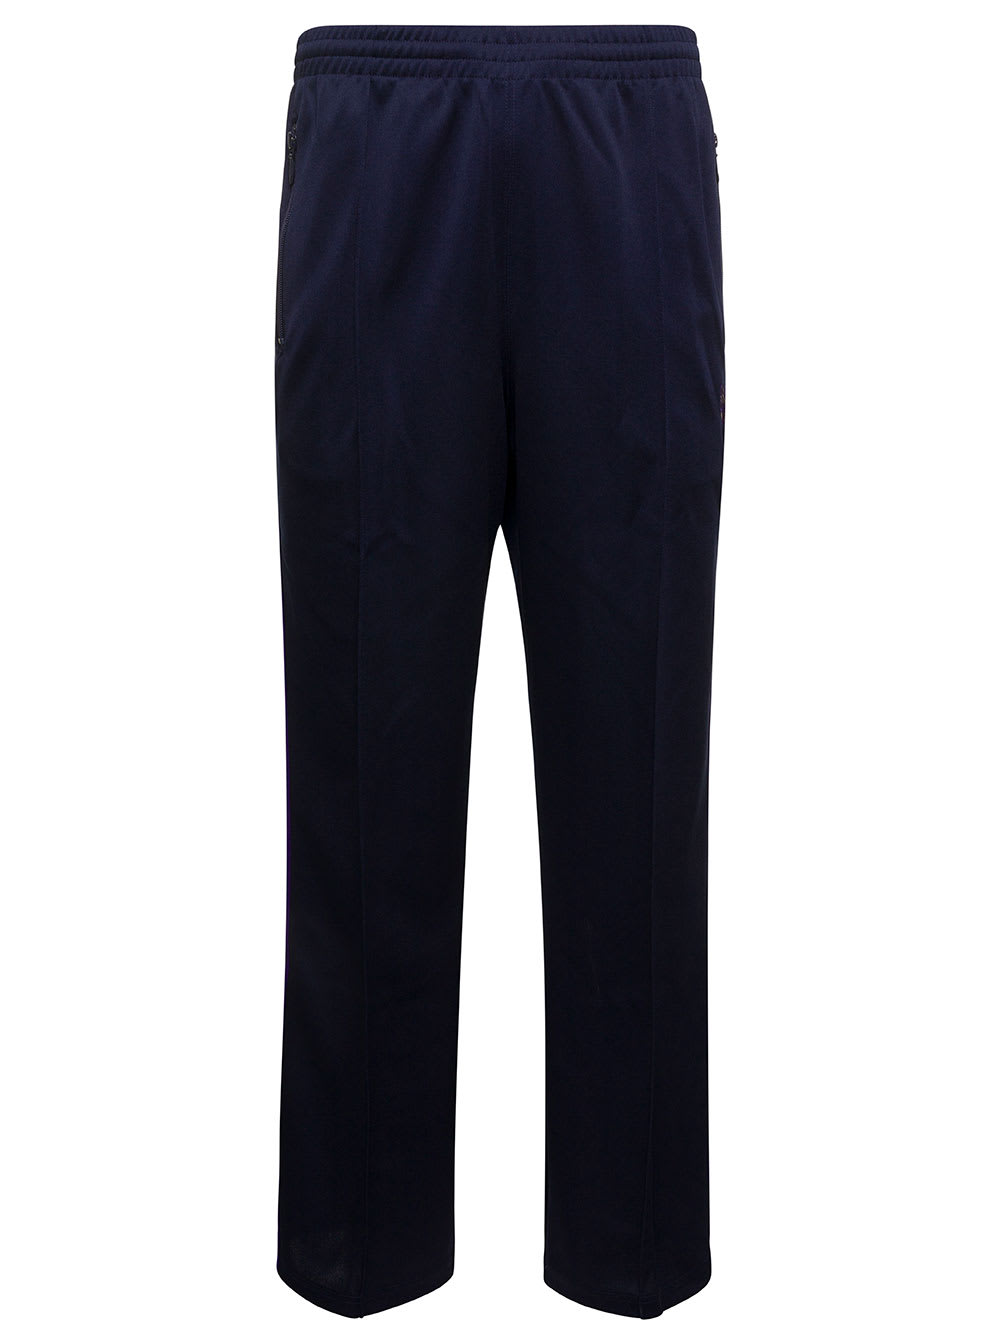 NEEDLES TRACK PANT - POLY SMOOTH